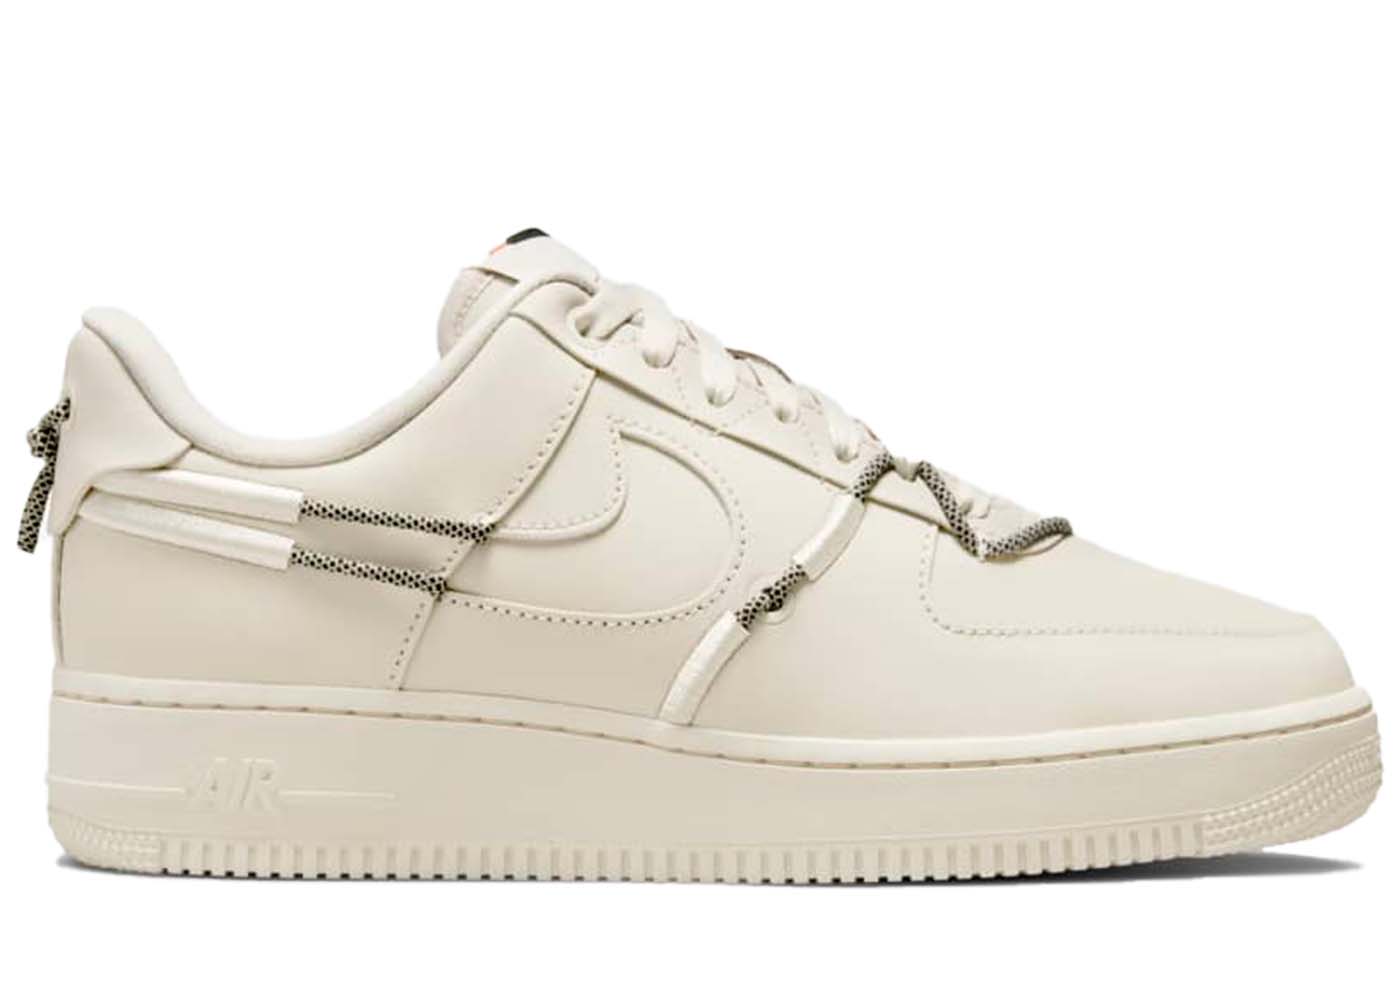 Nike Air Force Low '07 LX 'Light Orewood Brown' (WMNS) DH4408-102  Novelship